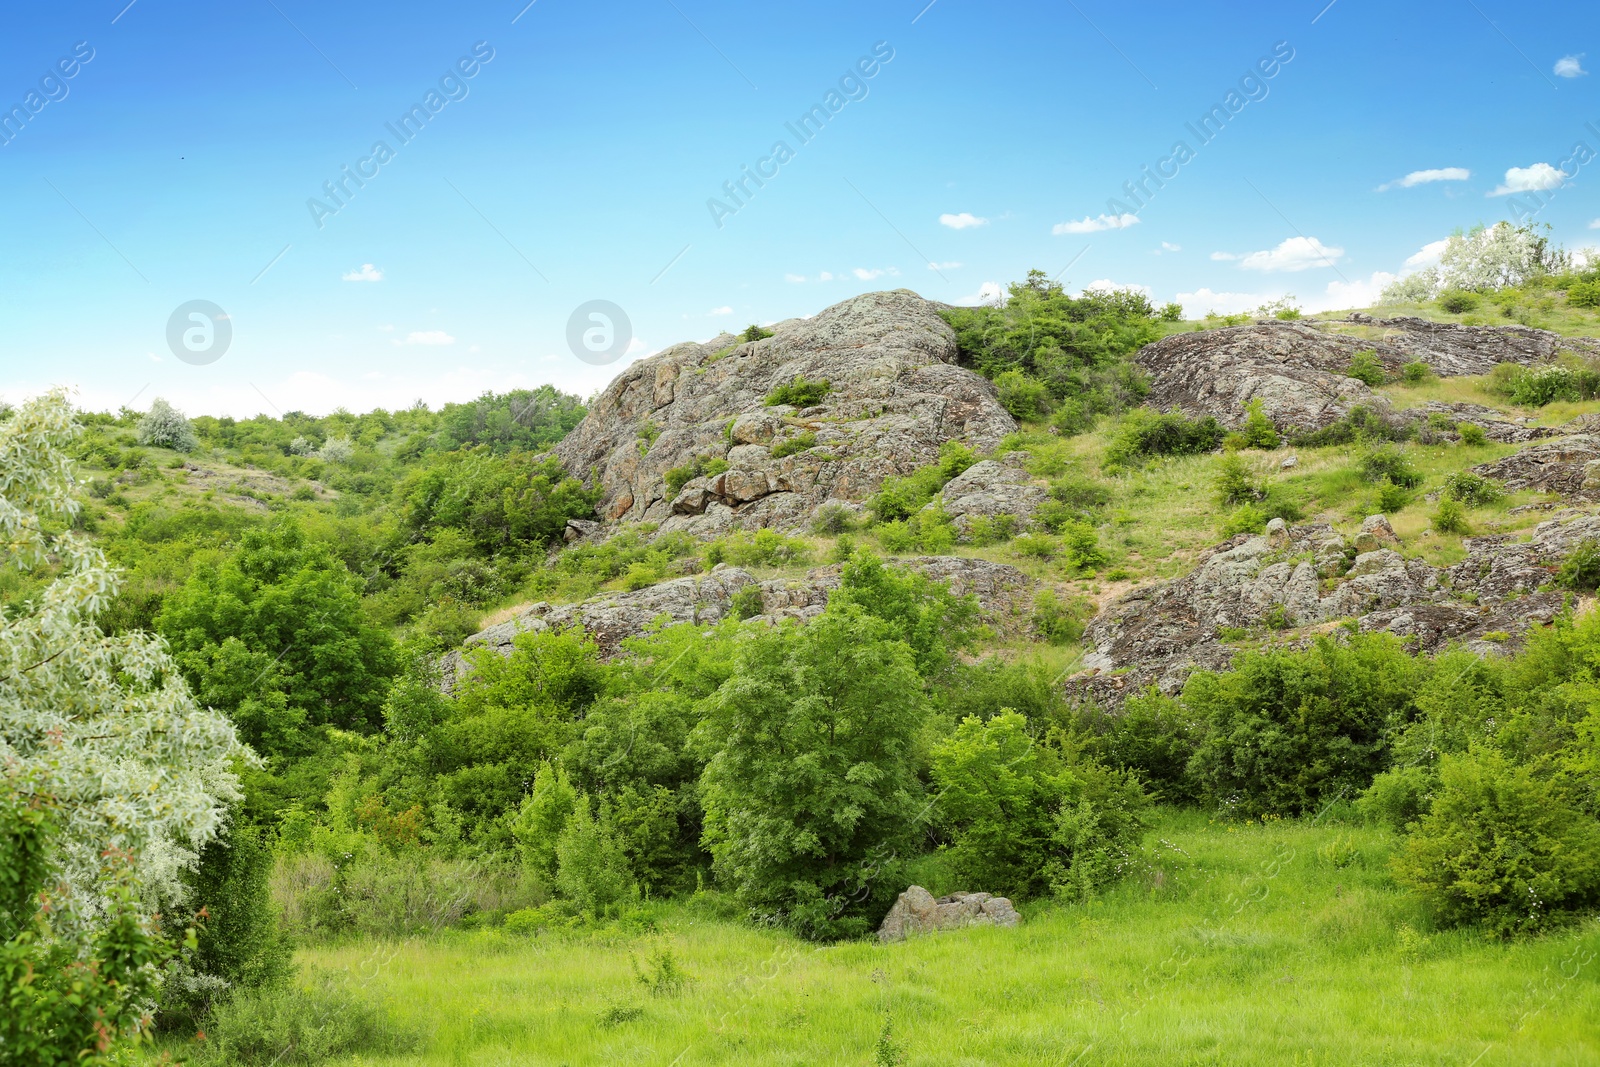 Photo of Picturesque landscape with rocky hill and green plants. Camping season